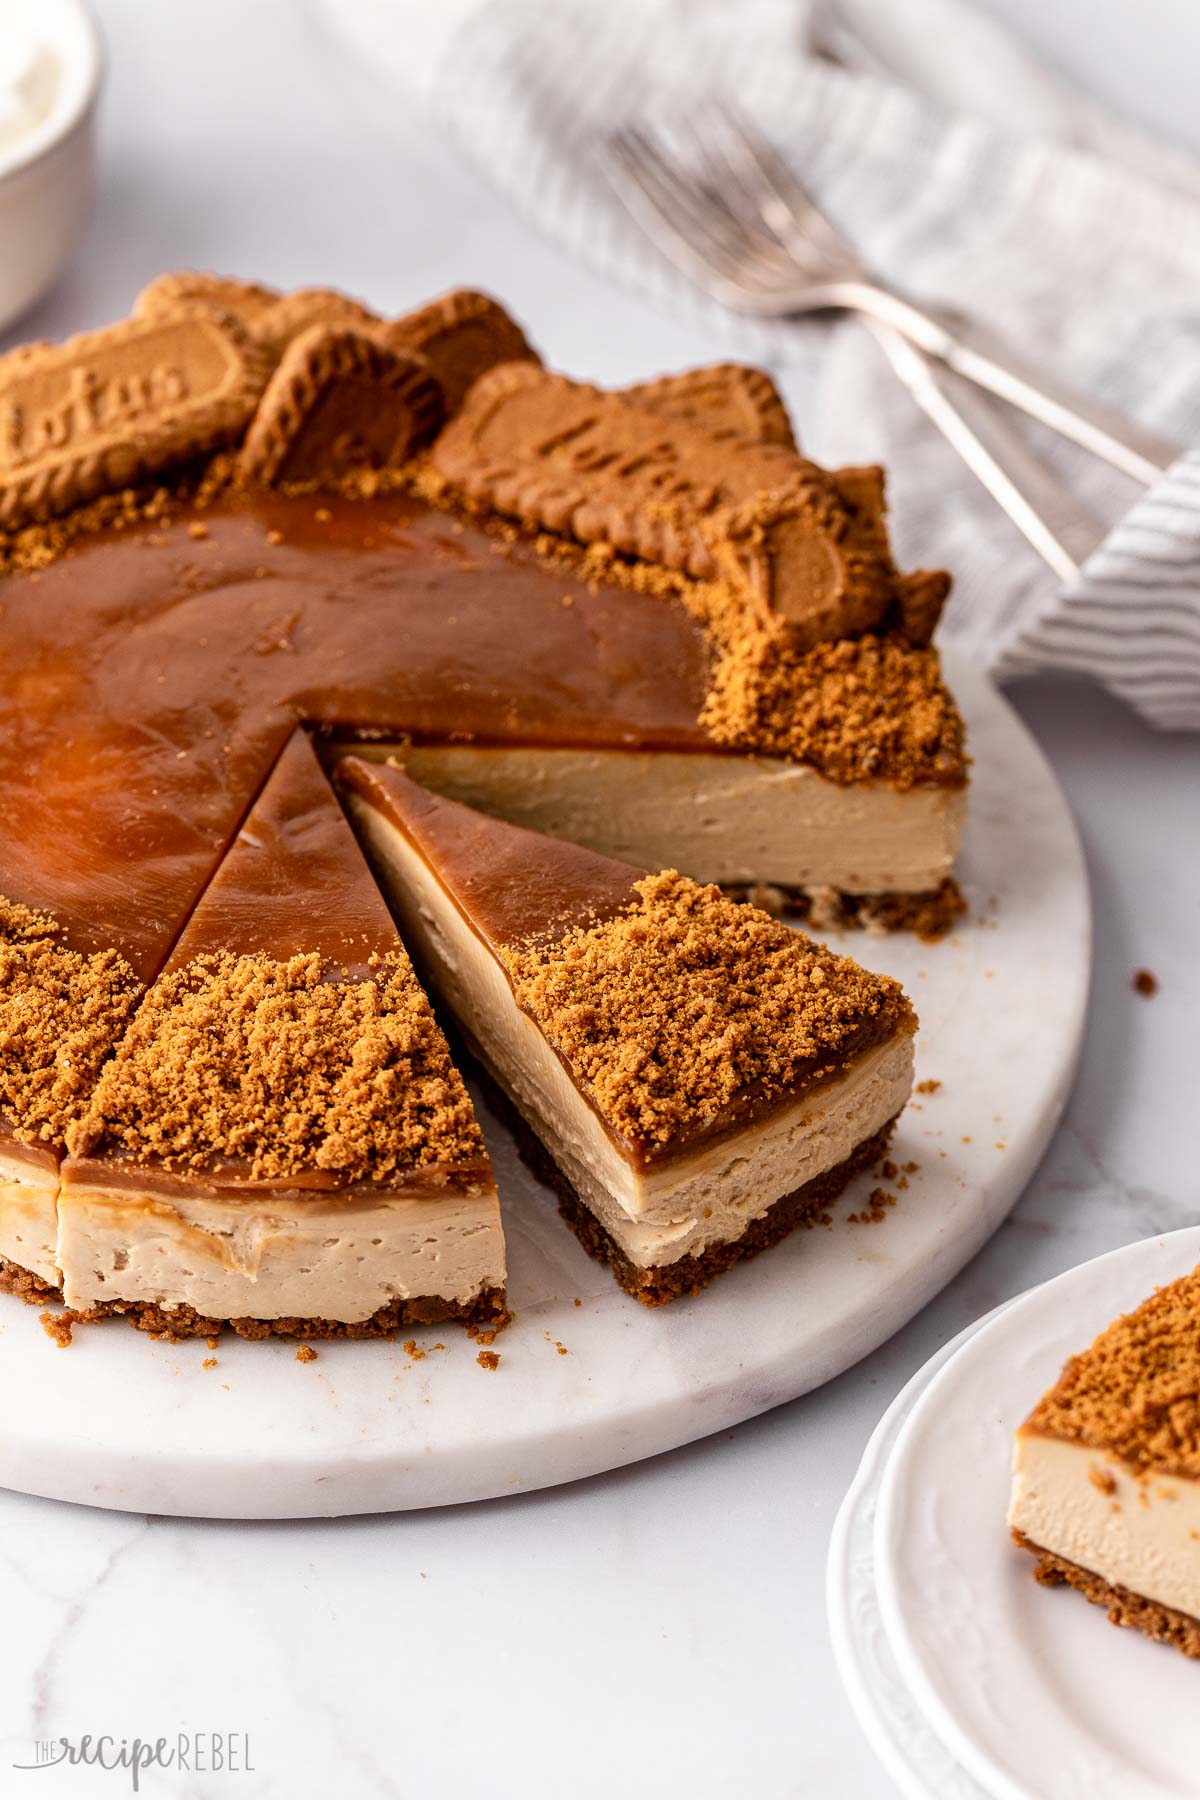 no bake biscoff cheesecake with two pieces cut and ready to be served.